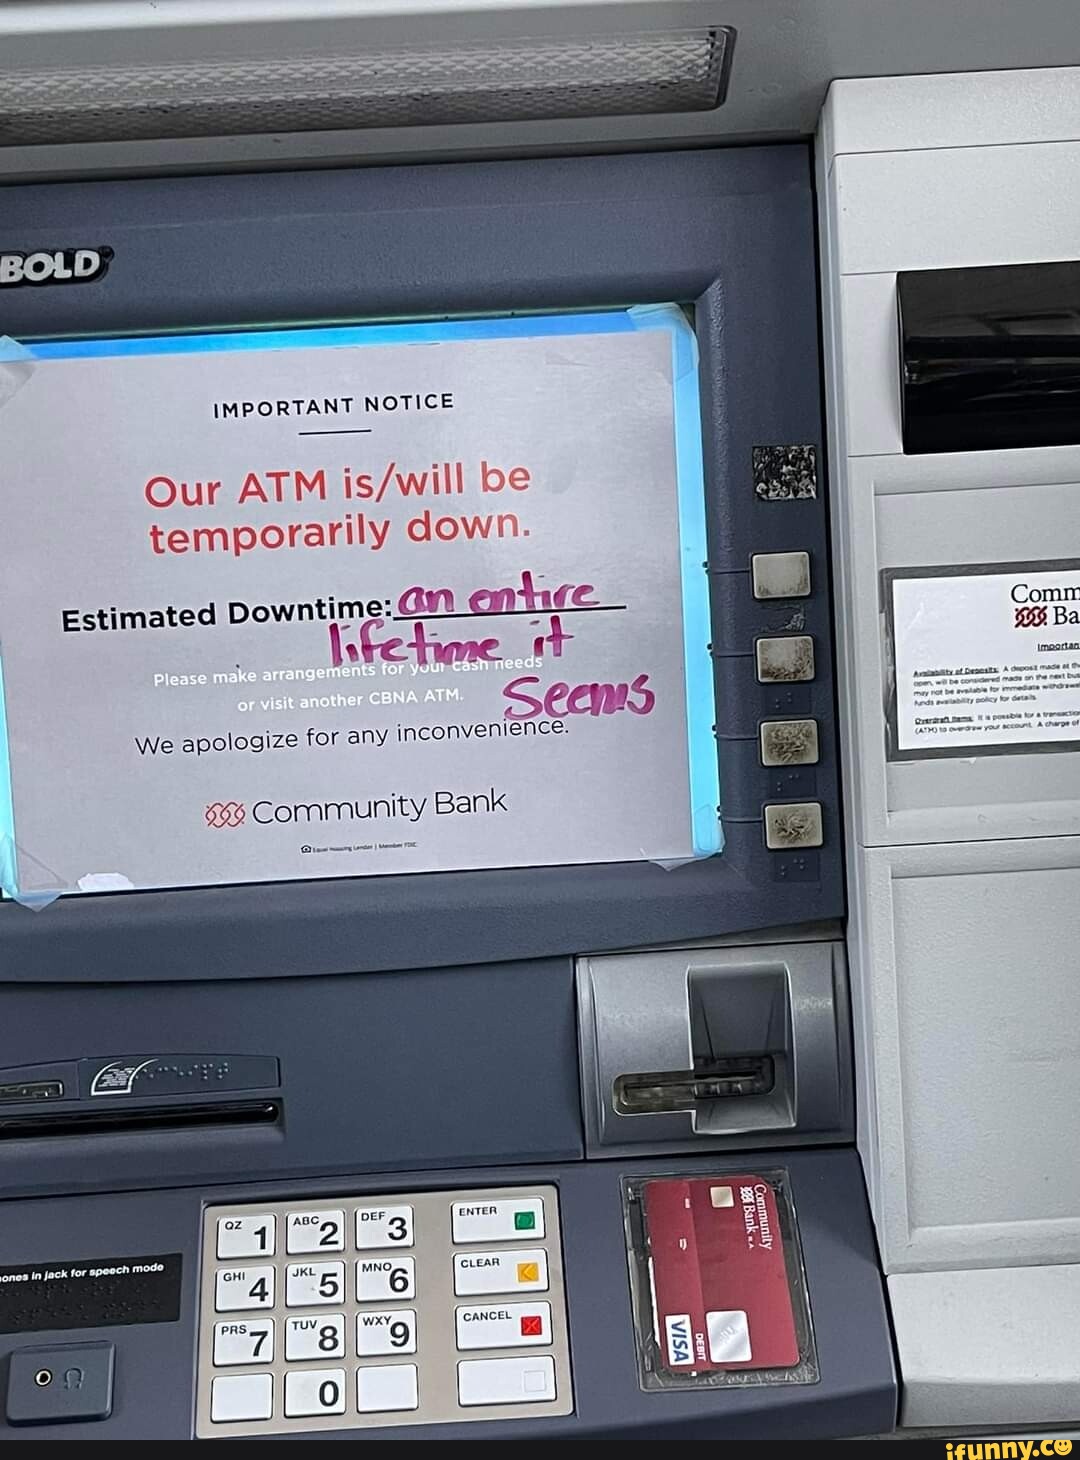 BOLD/ IMPORTANT NOTICE Our ATM be temporarily down. Estimated Downtime